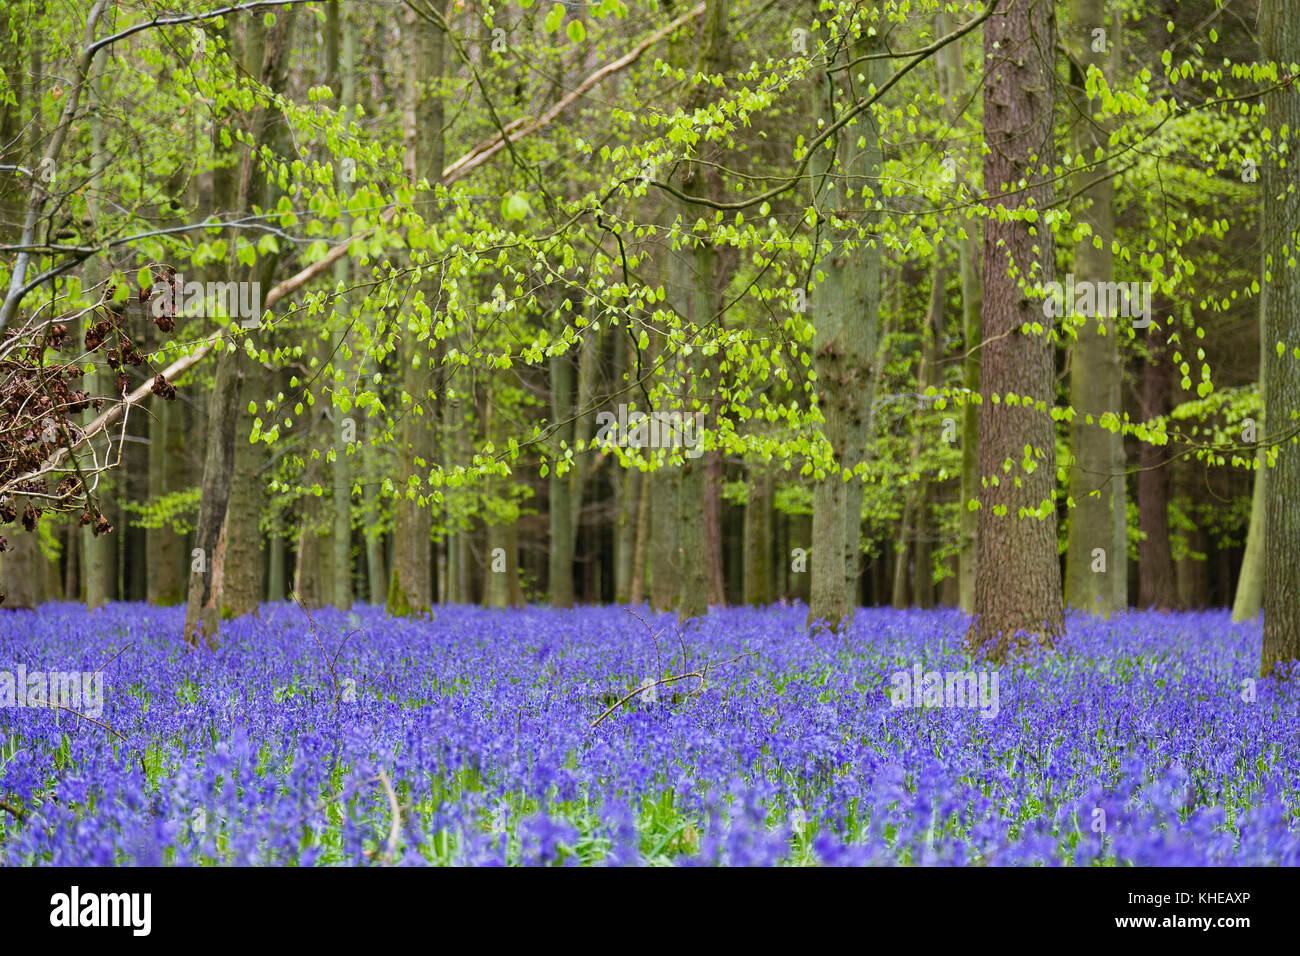 Hertfordshire, UK. A carpet of bluebells cover the floor of a forest. Stock Photo